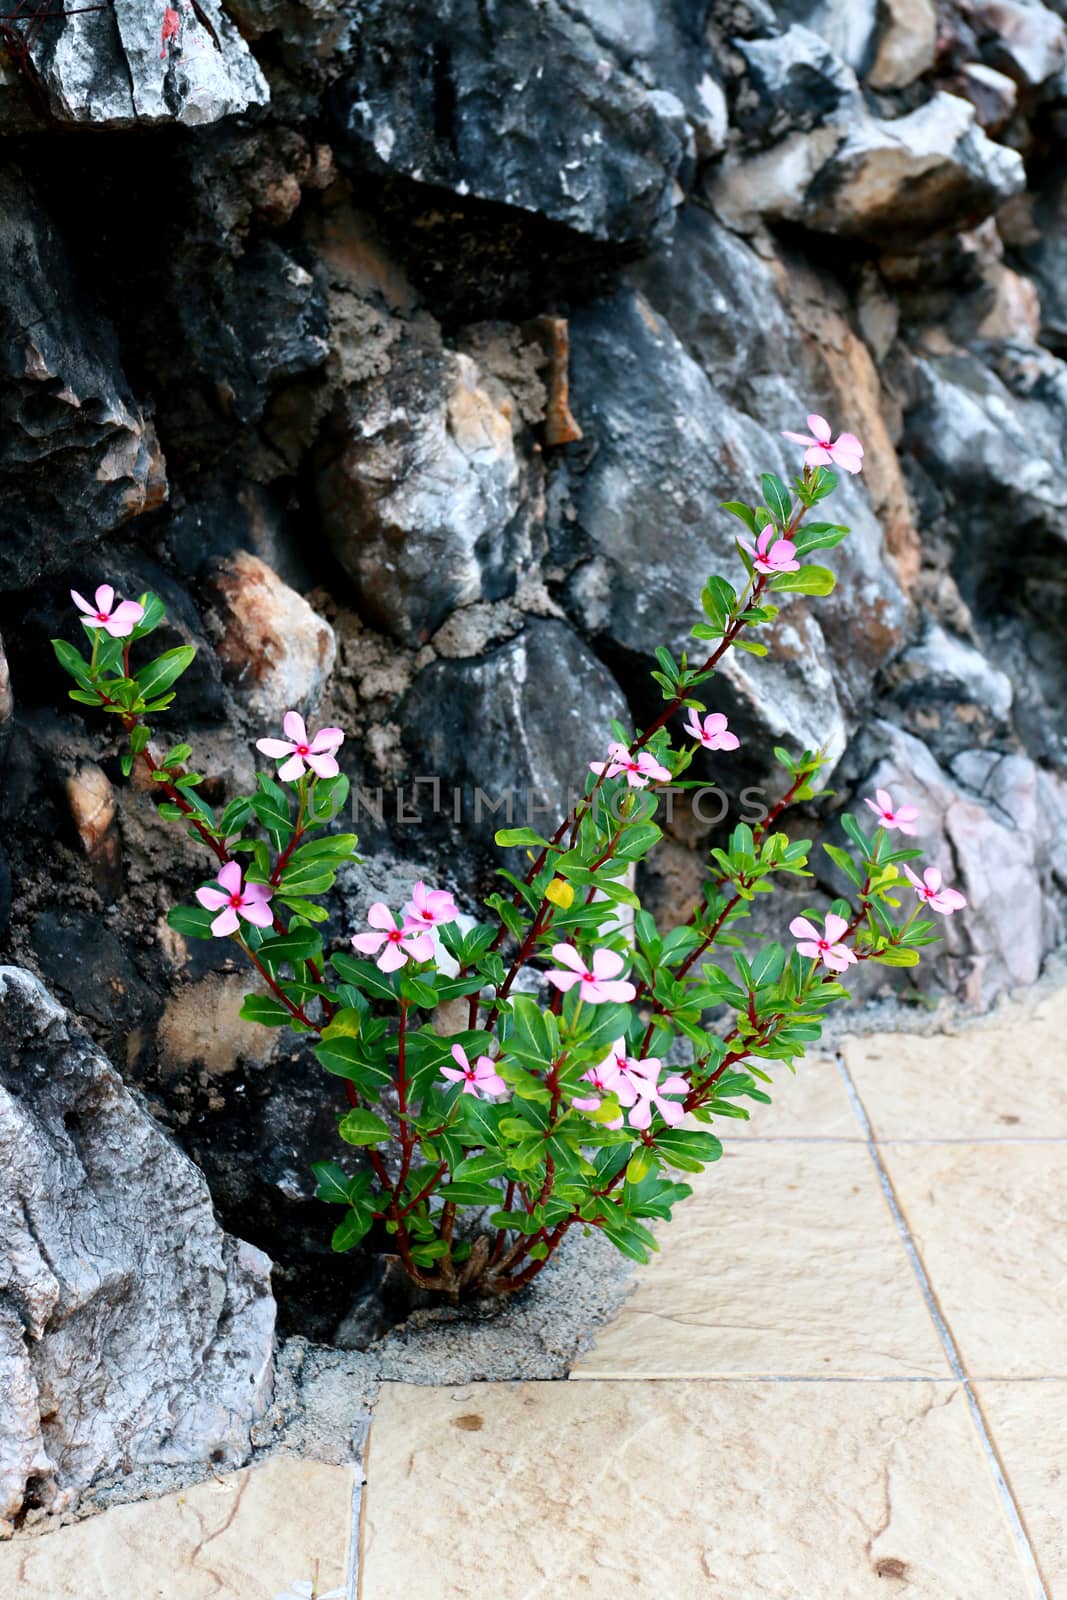 the branch of vinca growing from the hole between rocks and concret floor.